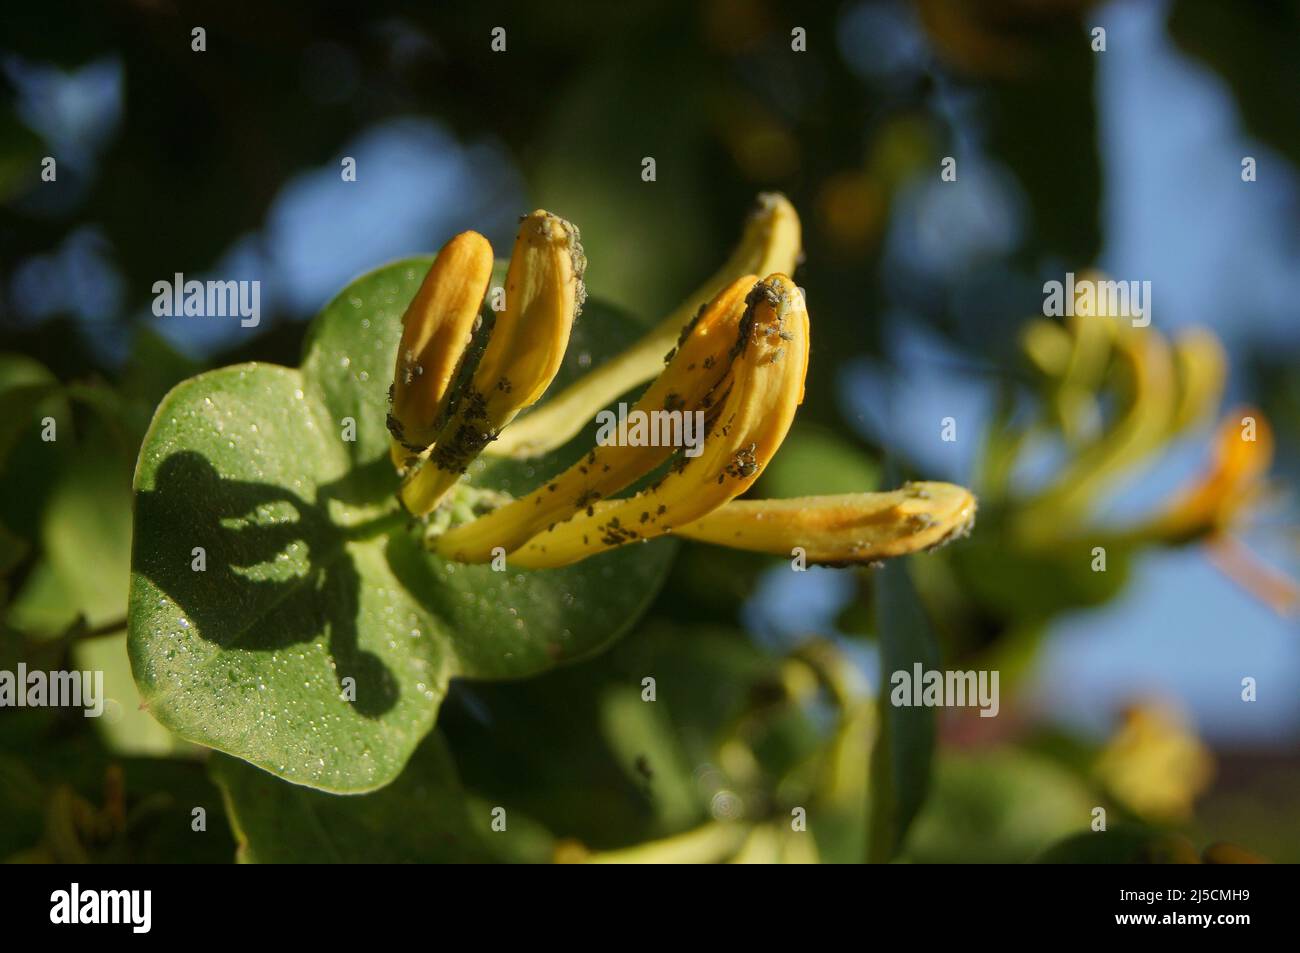 Close-up of Yellow Honeysuckle 'Lonicera flower buds with green bugs on the petals in the garden Stock Photo